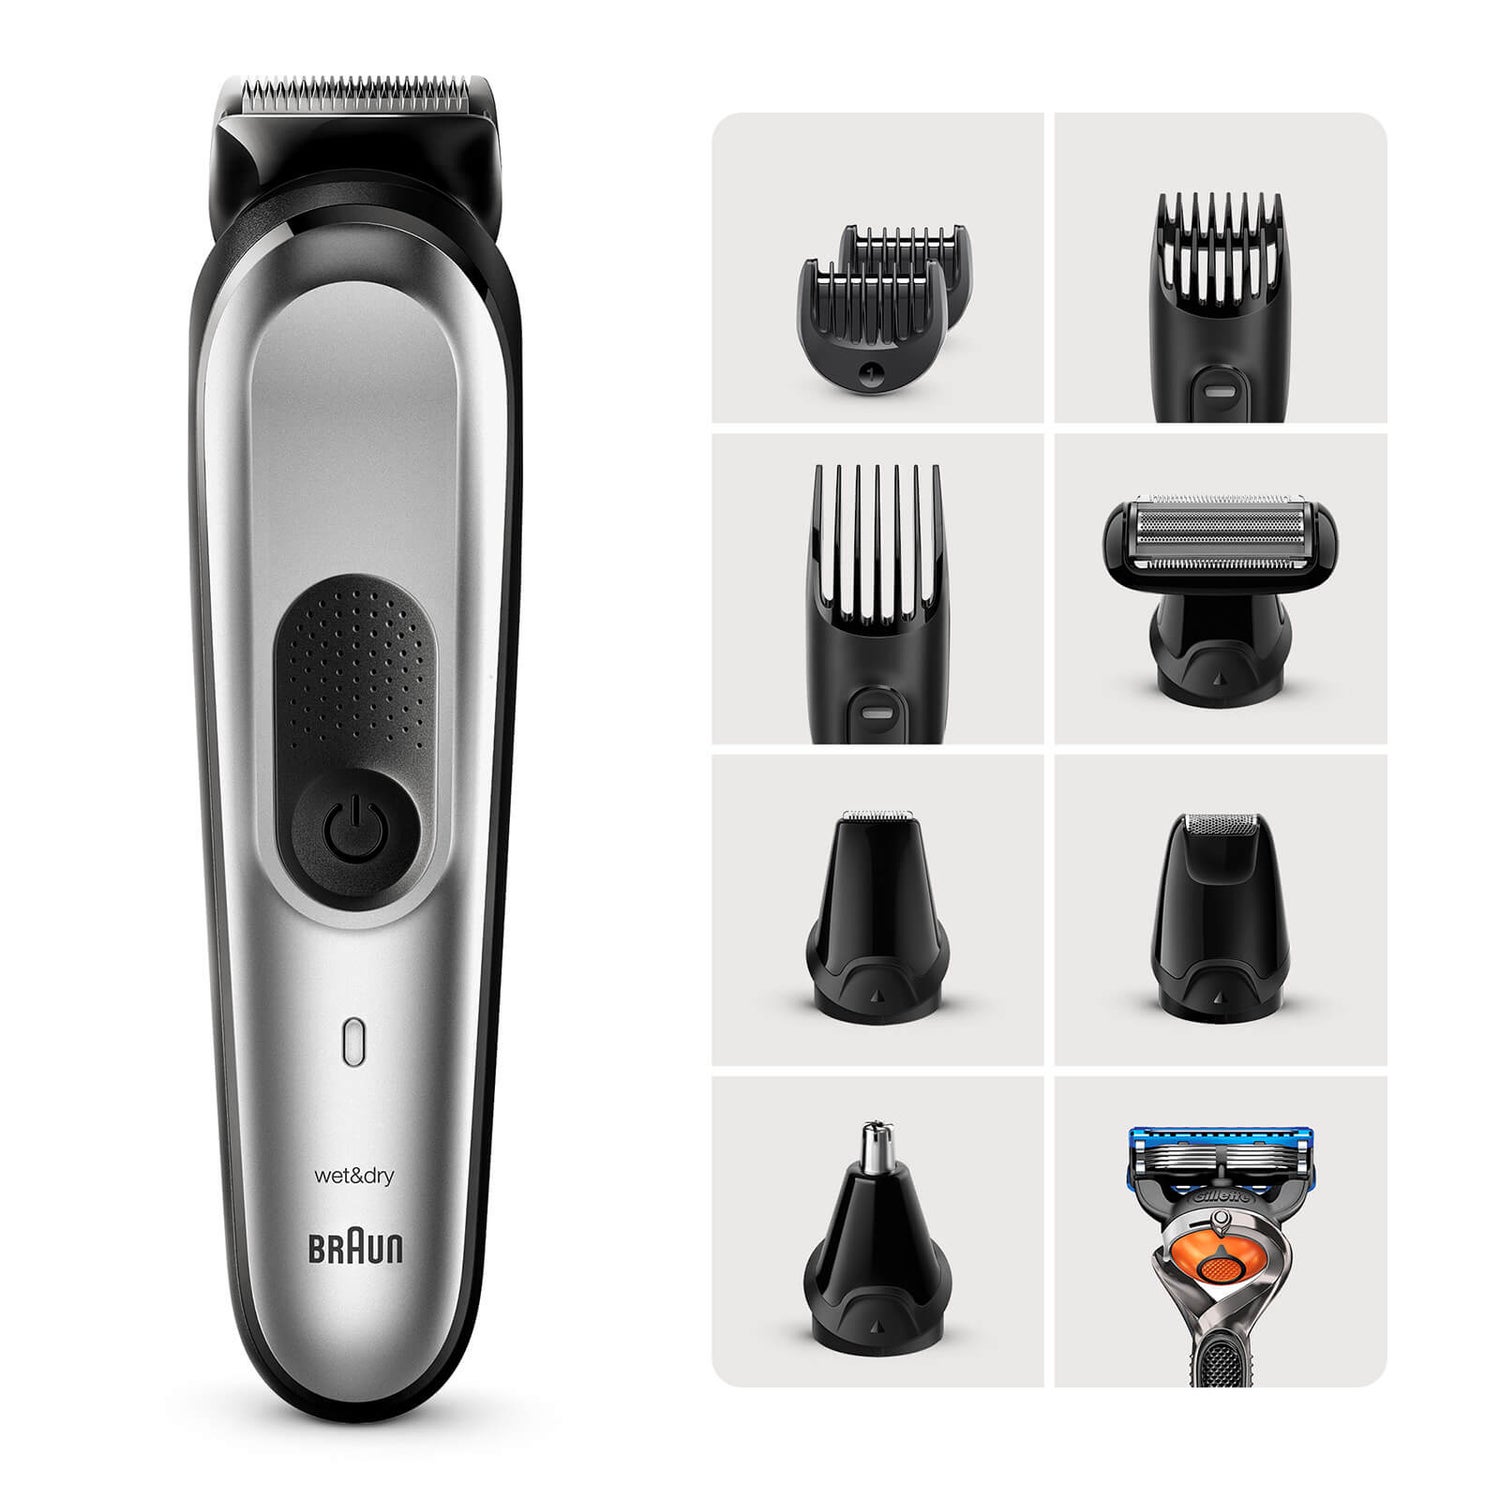 Braun All-in-one Trimmer MGK7220